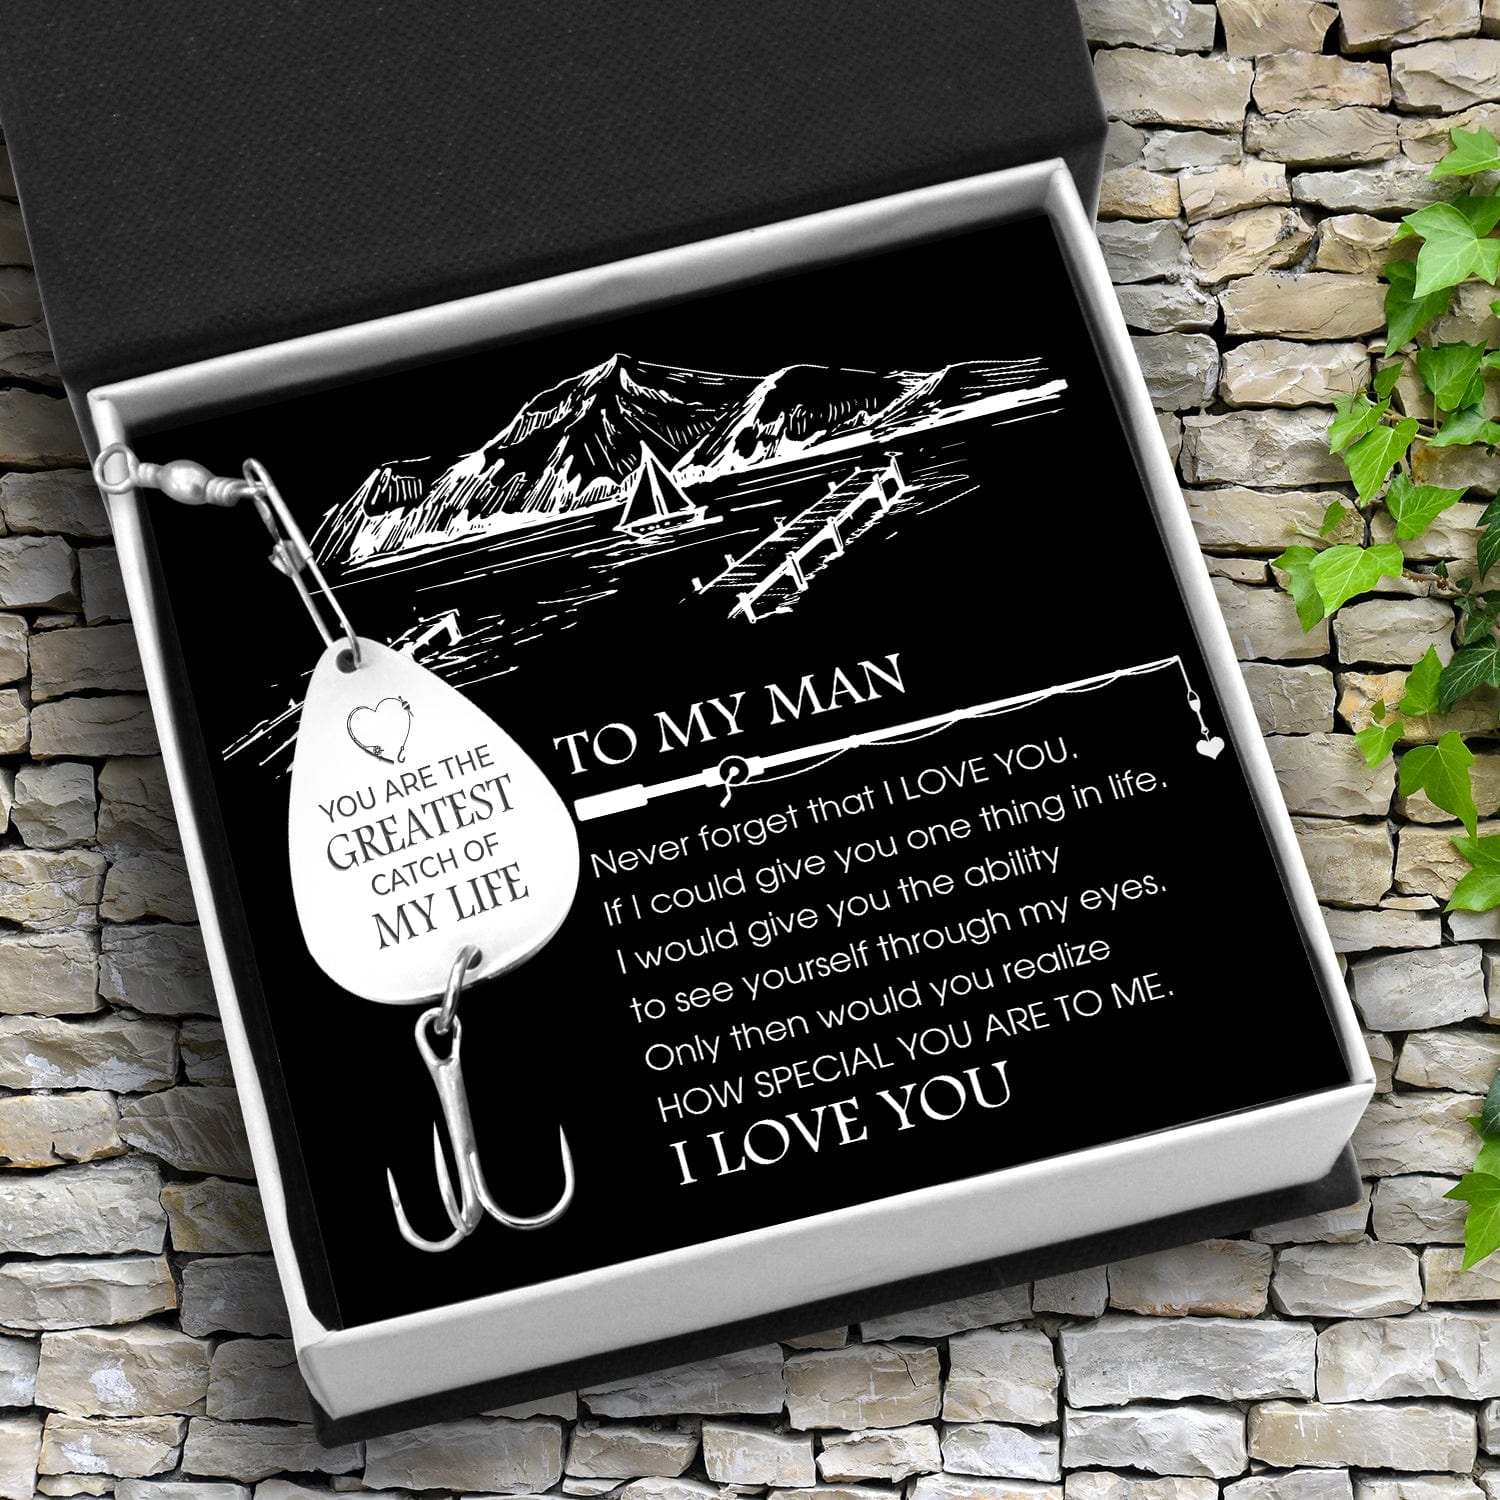 Personalized Fishing Hook - To My Man - The Greatest Catch Of My Life -  Gfa26002